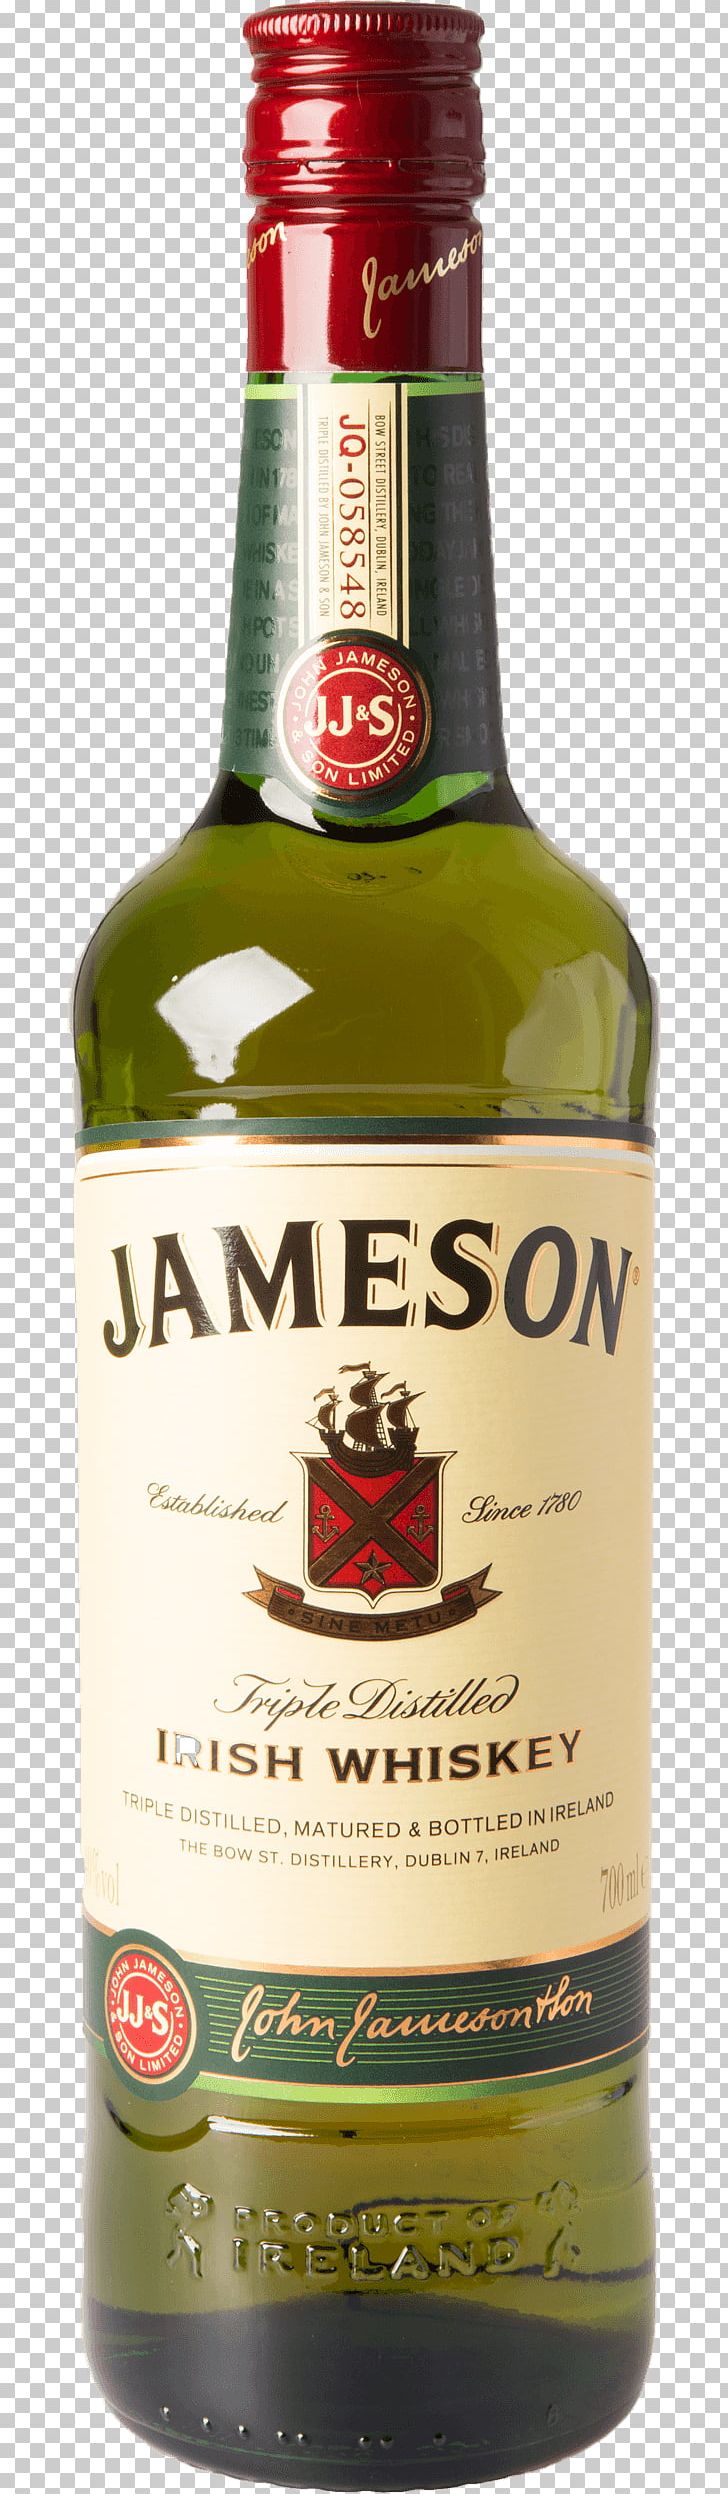 Jameson Irish Whiskey Bourbon Whiskey Old Bushmills Distillery PNG, Clipart, Alcohol, Alcoholic Beverage, Alcoholic Drink, Barrel, Blend Free PNG Download